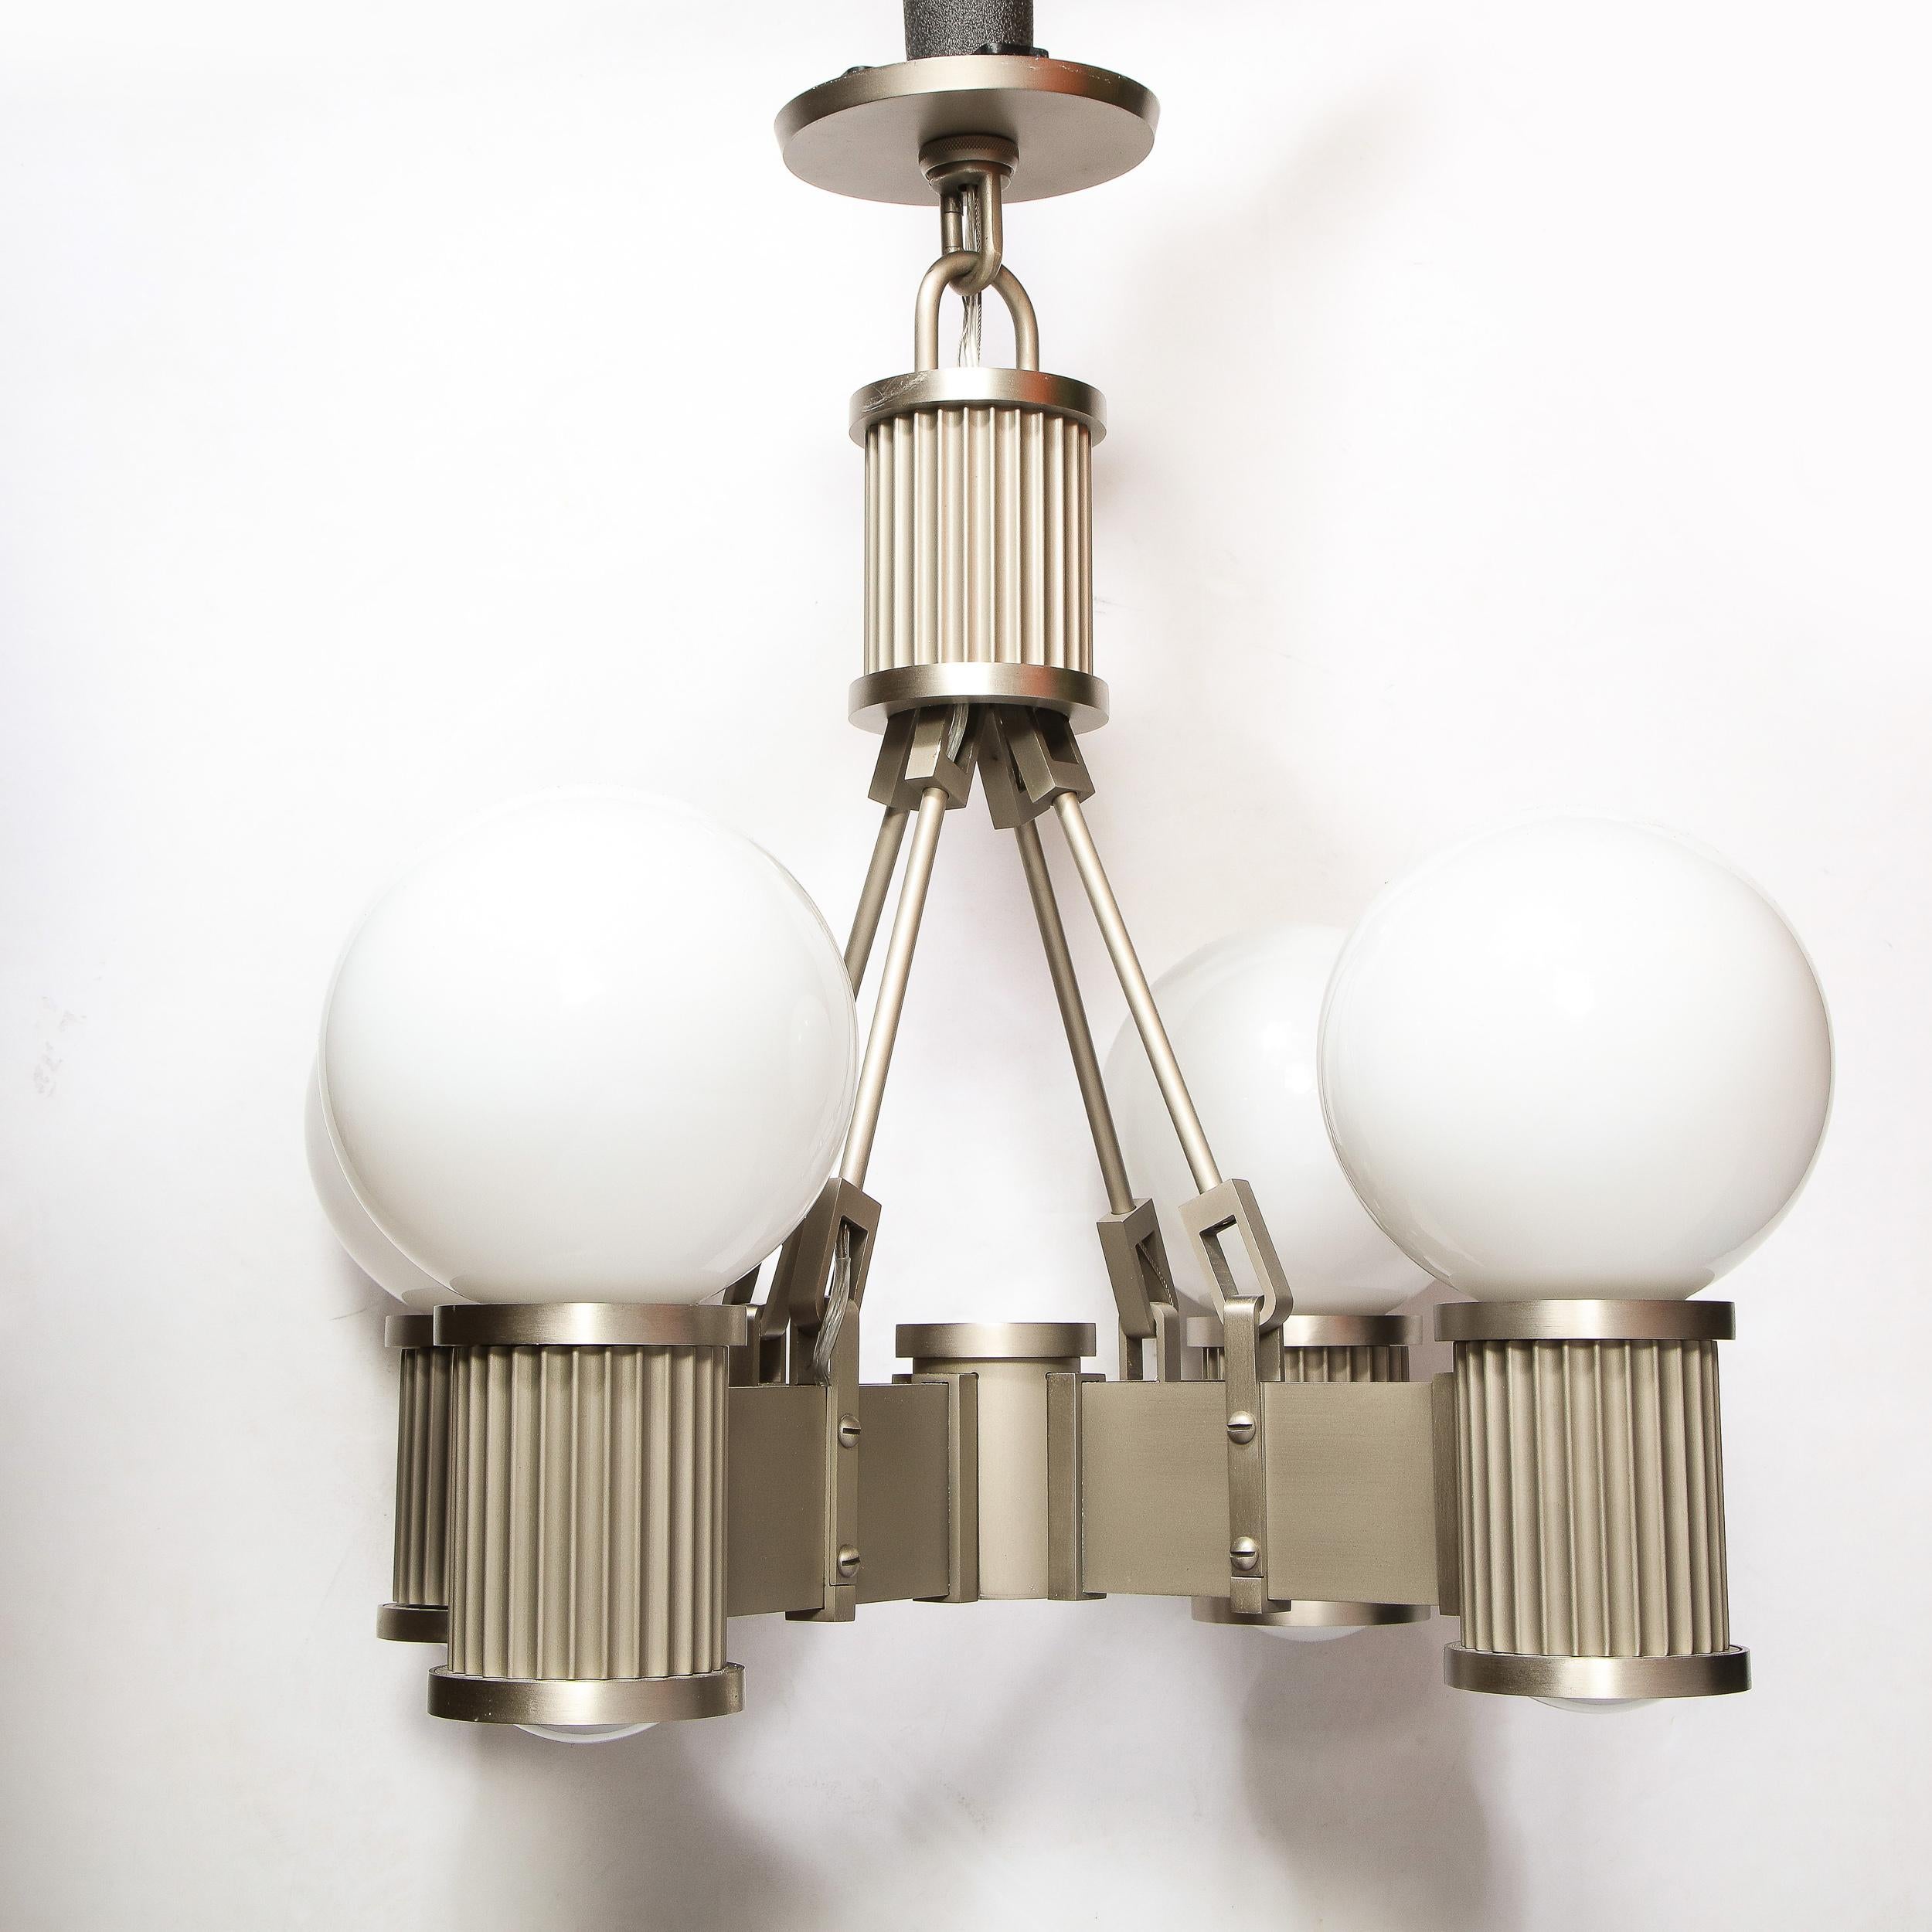 Art Deco Revival Four Arm Brushed Nickel & Frosted Glass Chandelier For Sale 2